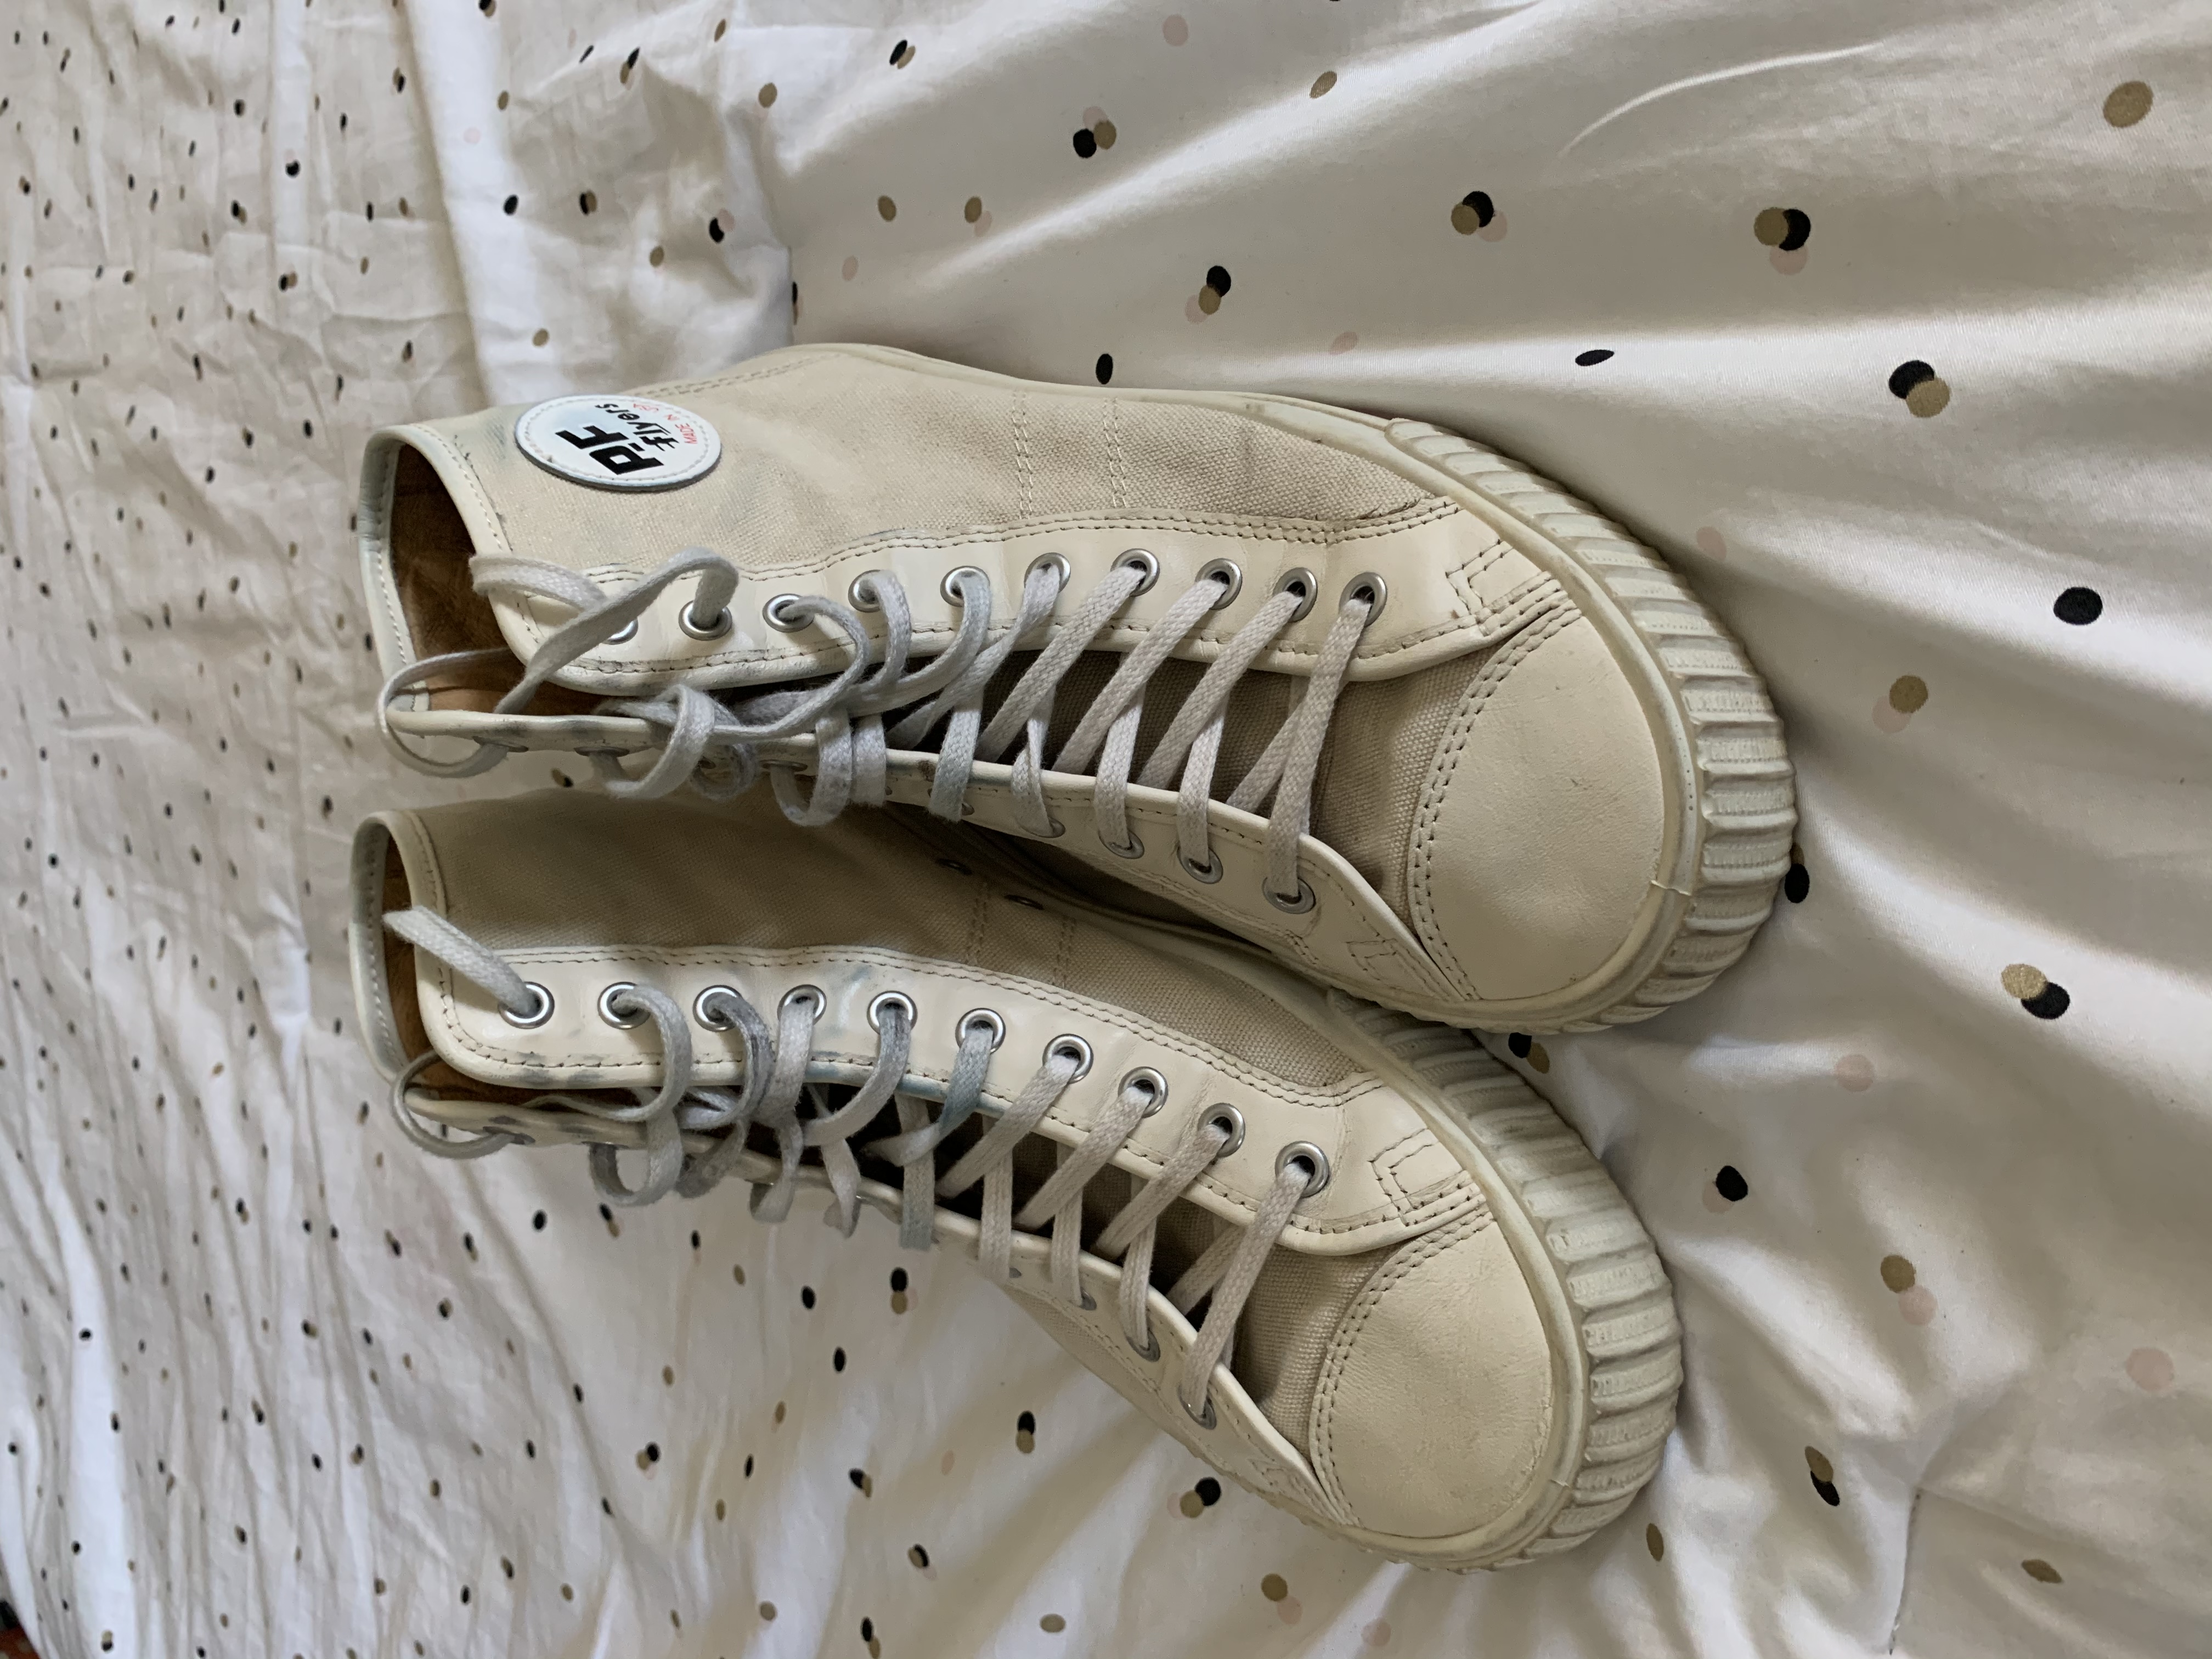 PF Flyers Made In The USA size 11.5 | The Fedora Lounge